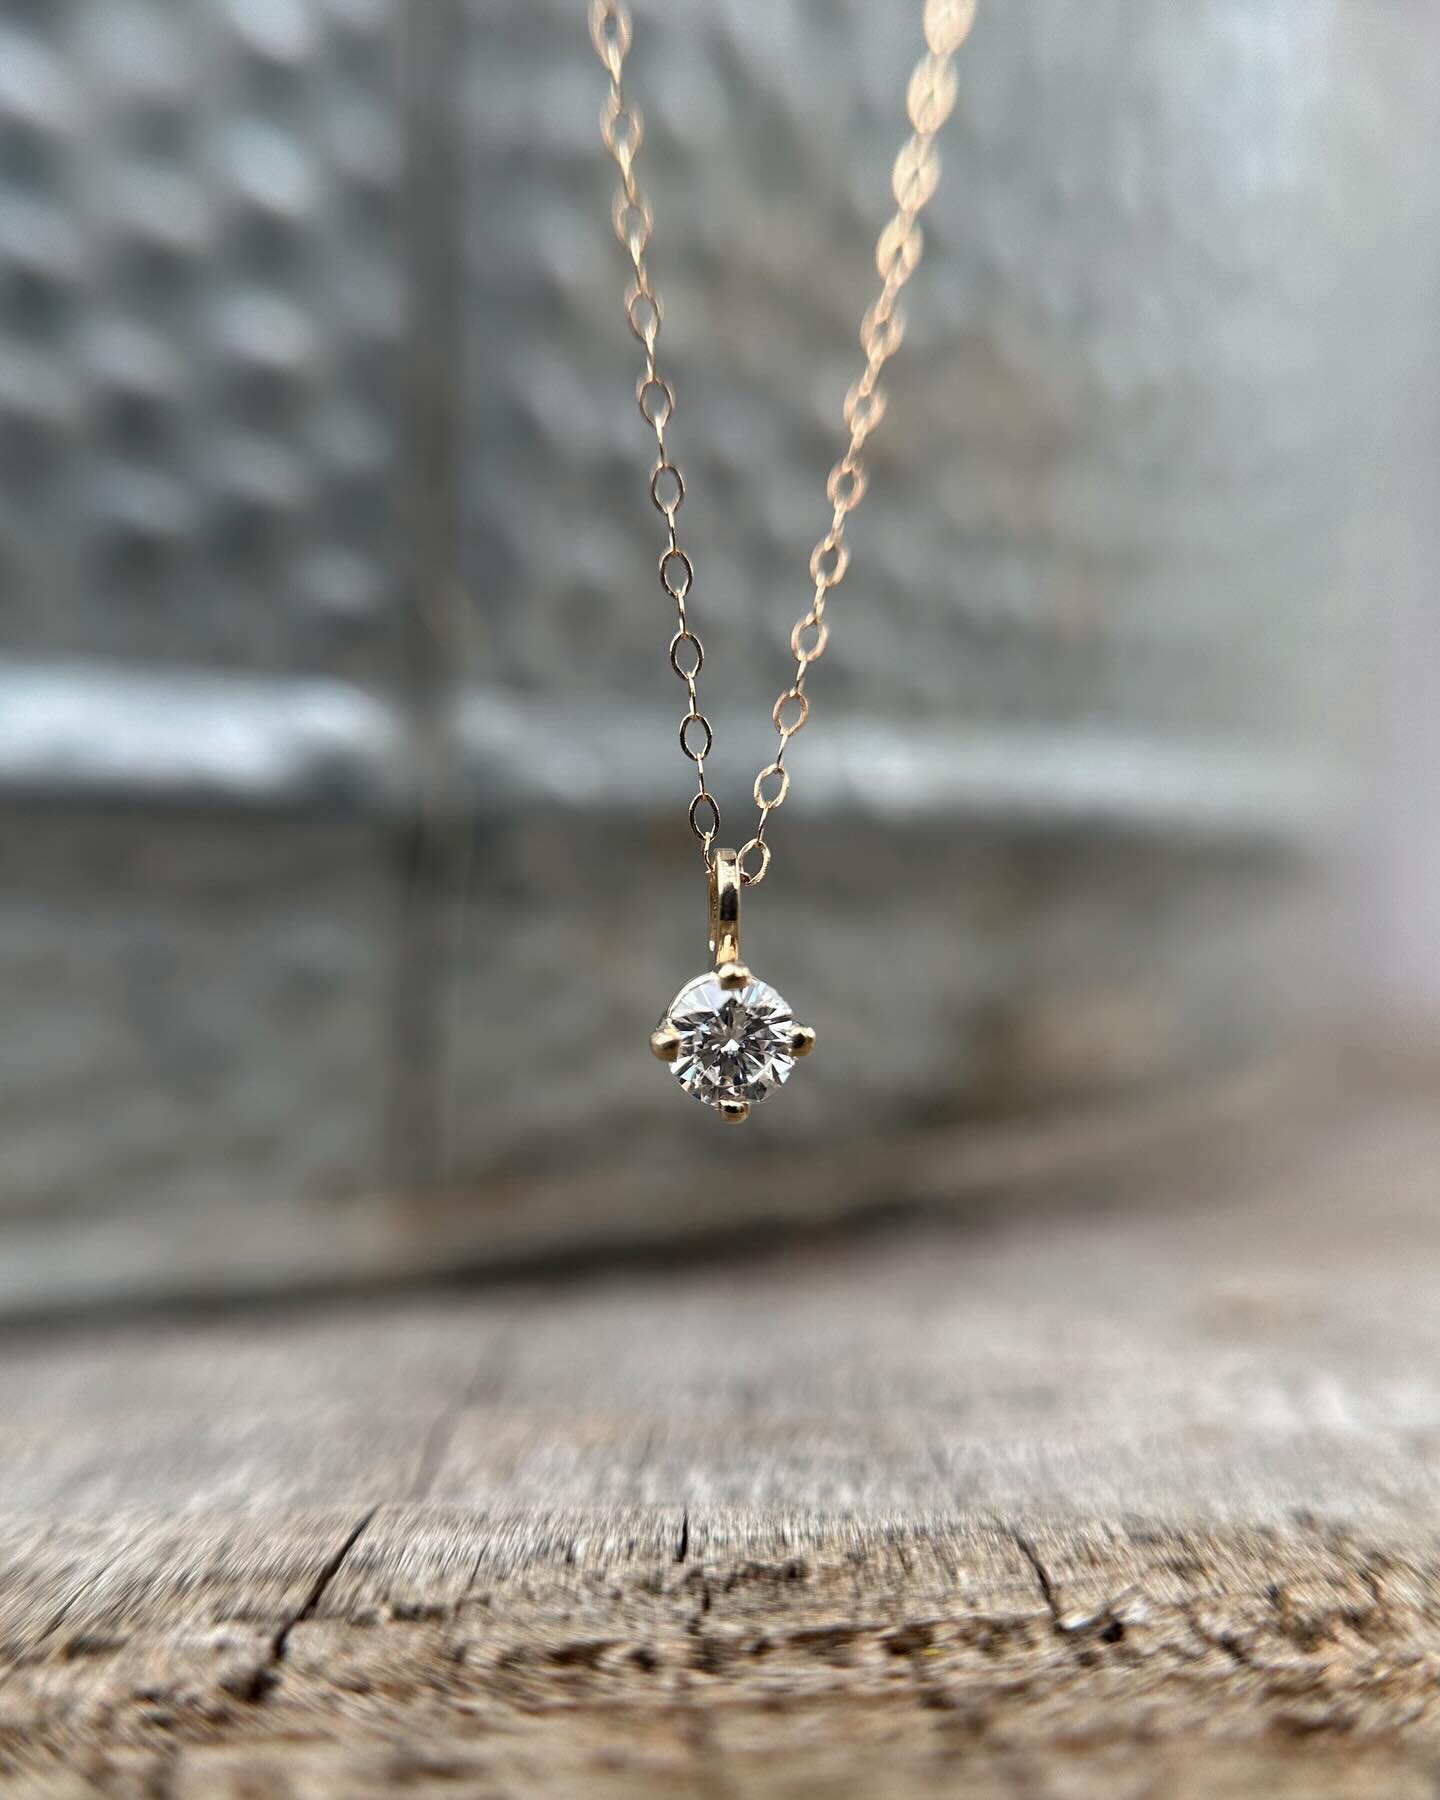 Have you been eyeing a new diamond piece of jewelry? What better time to treat yourself than the month of April! The month of diamond 💎